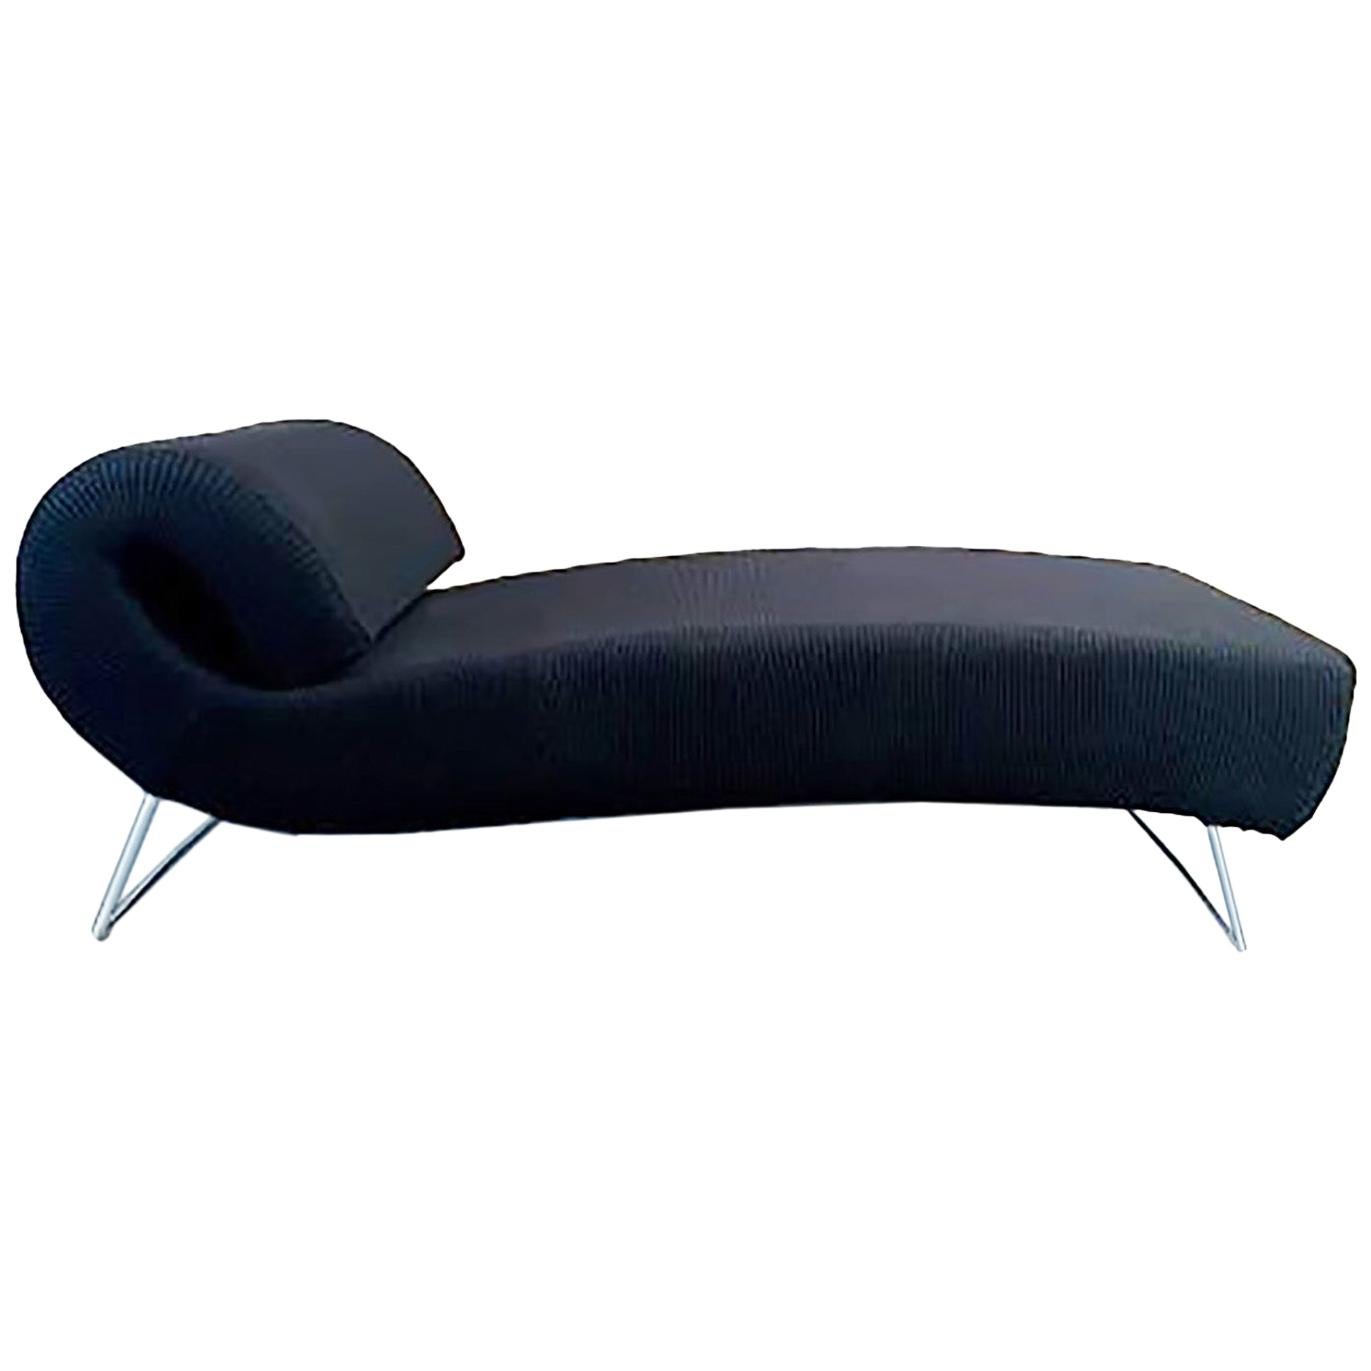 Pascal Mourgue, Ligne Roset, Sofa, Daybed 2004